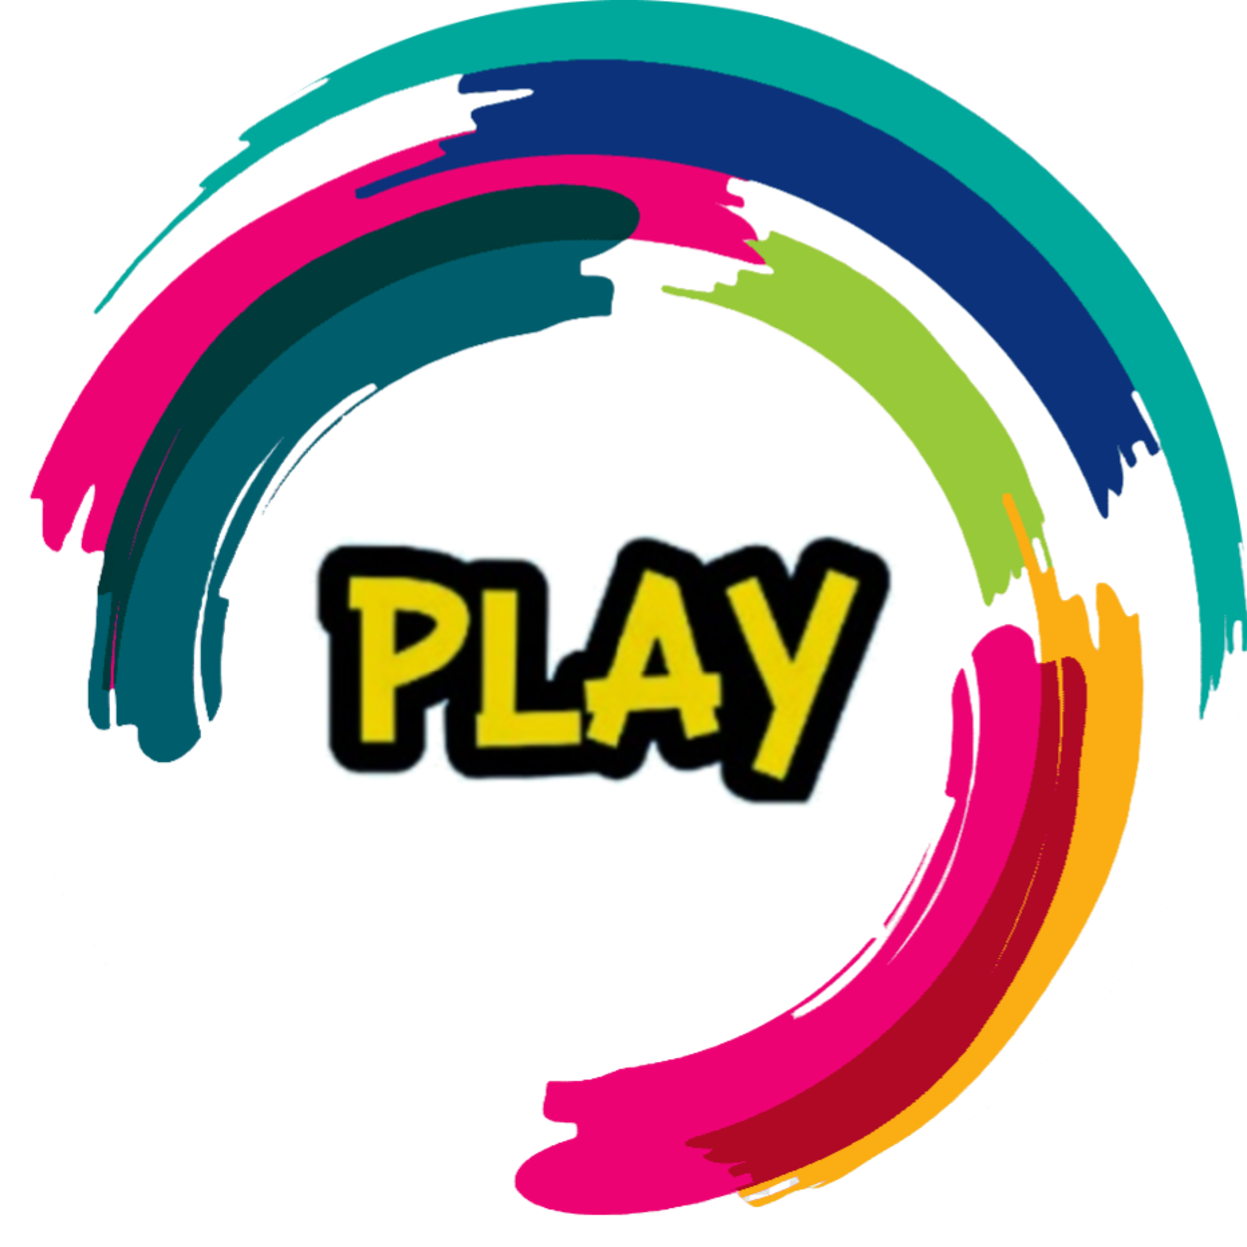 Play Games Android - Unlimited Fun at Your Fingertips!